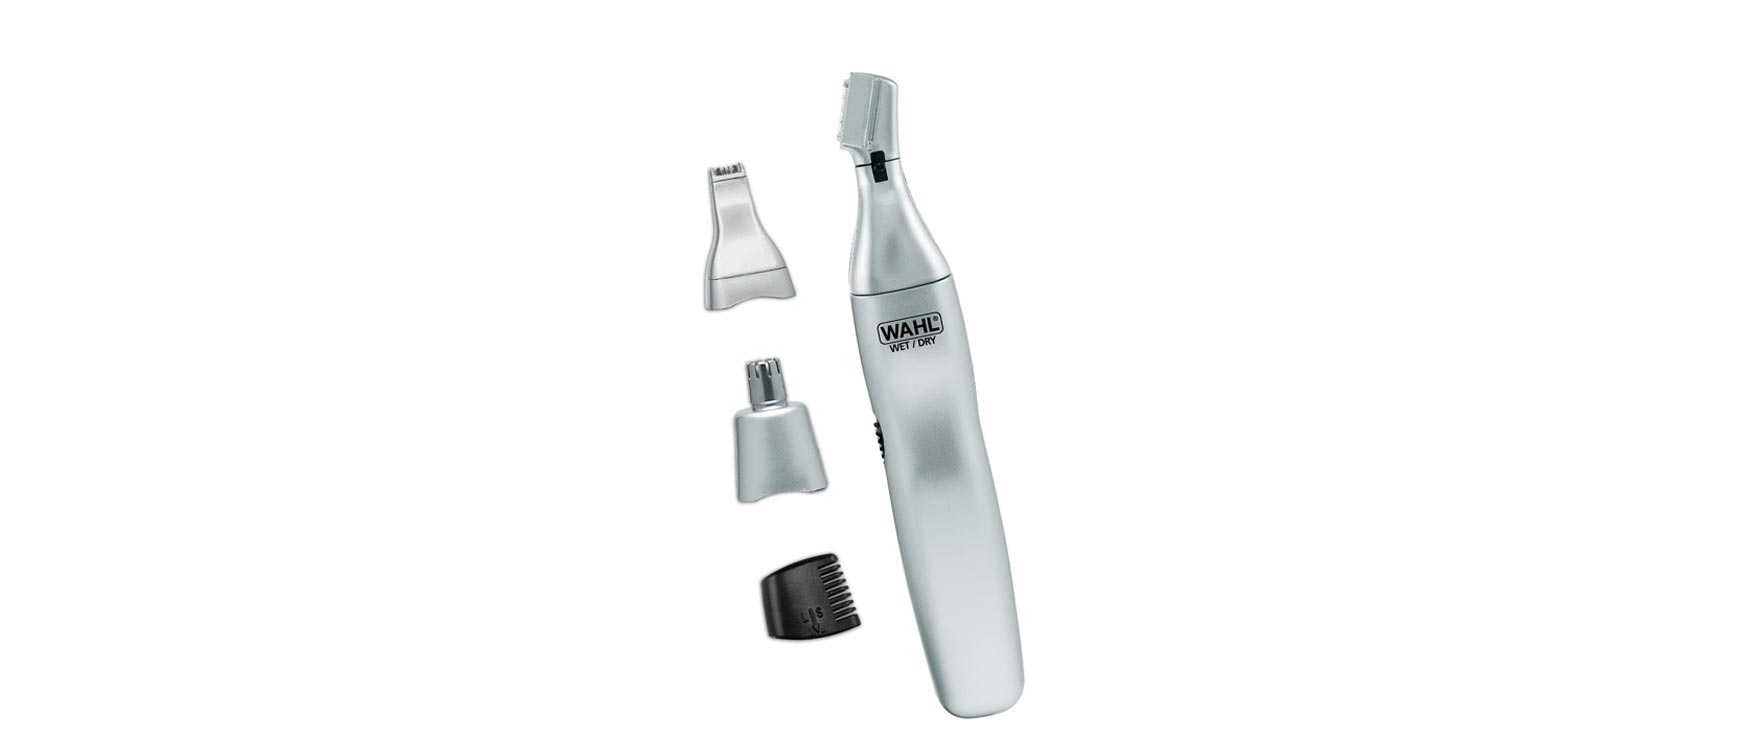 3. Wahl Ear, Nose, & Brow Trimmer Clipper